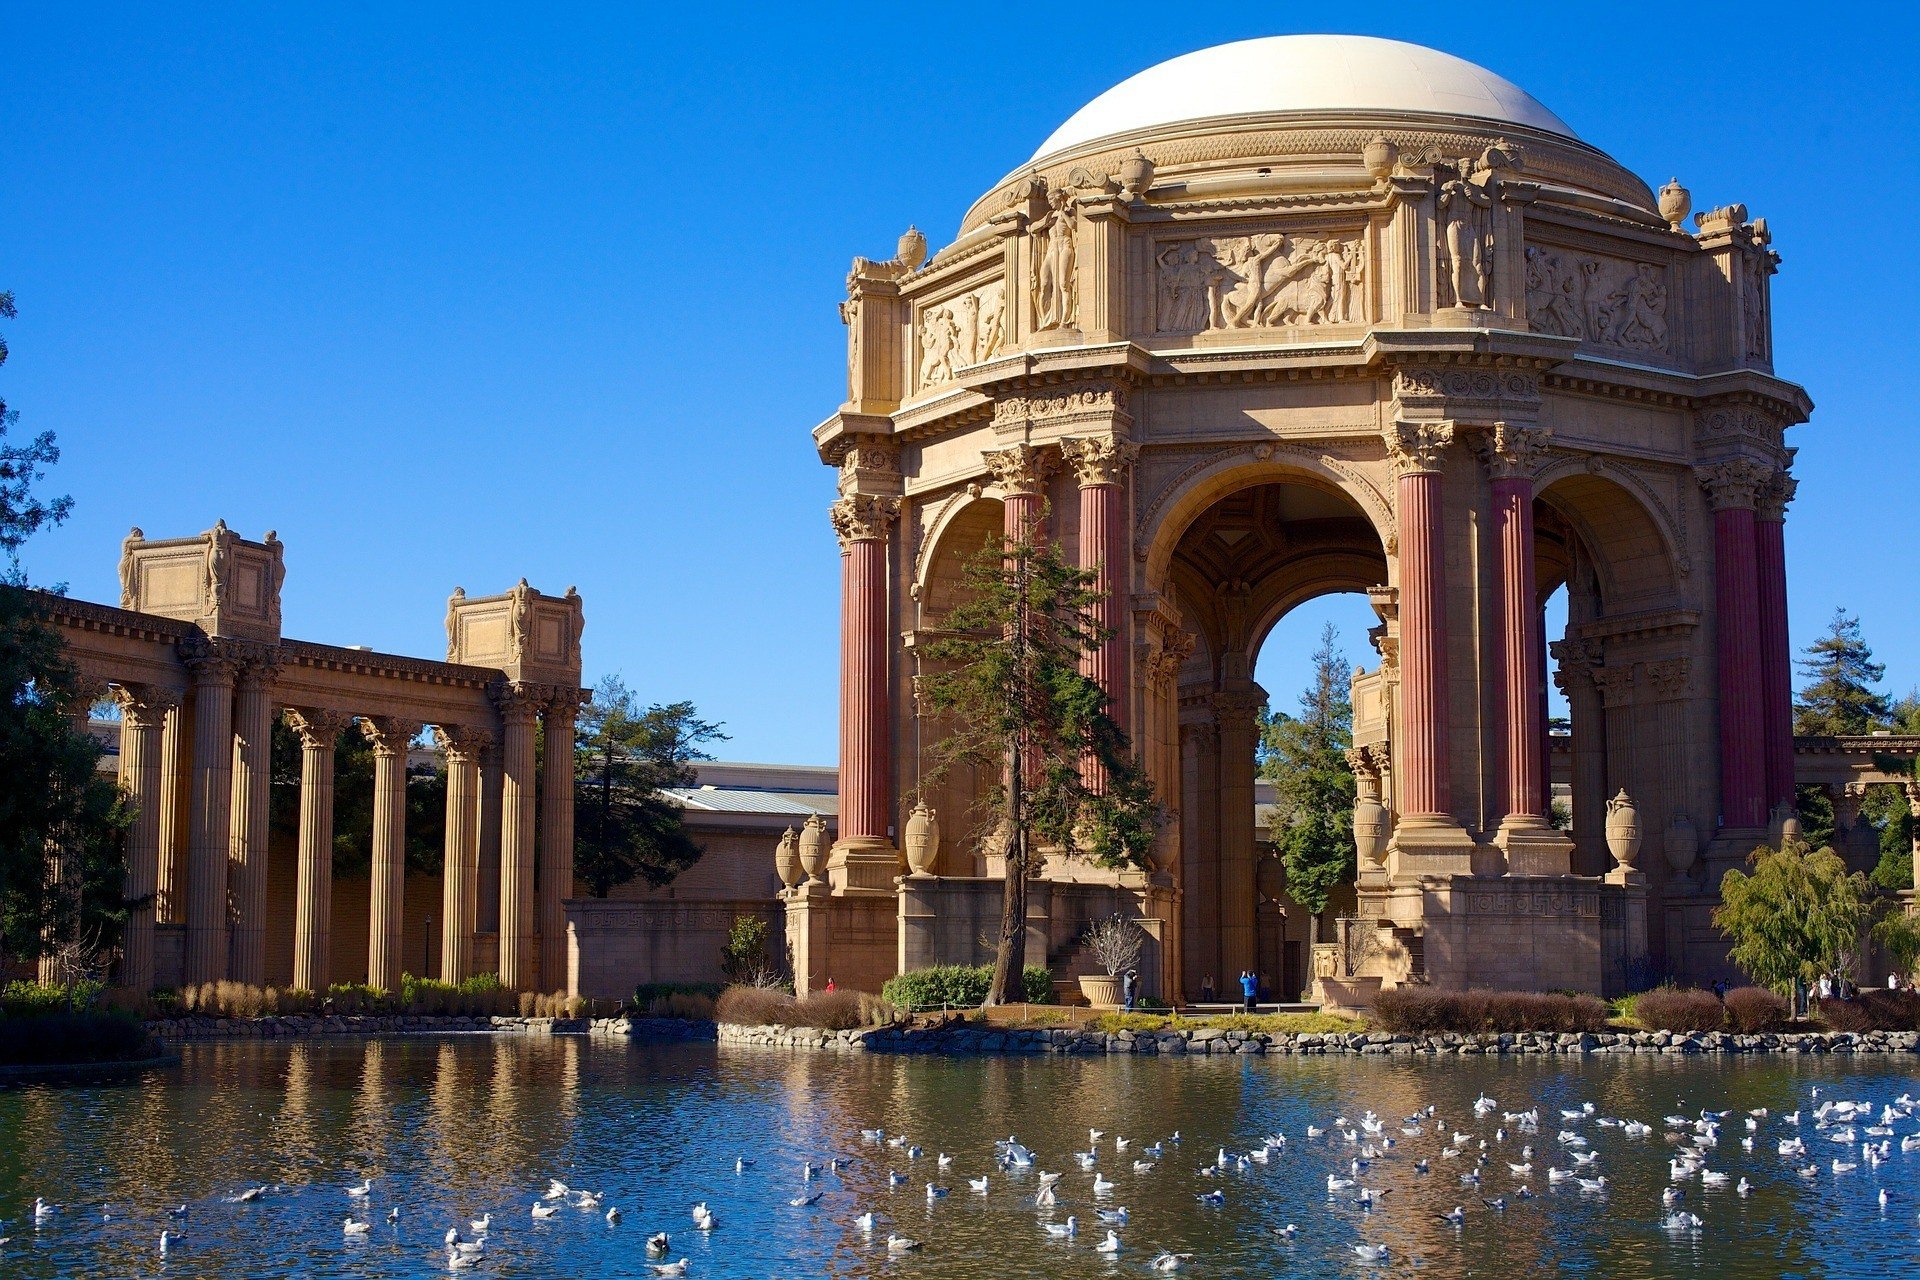 35 BEST Places to Visit in San Francisco (2021 Guide)